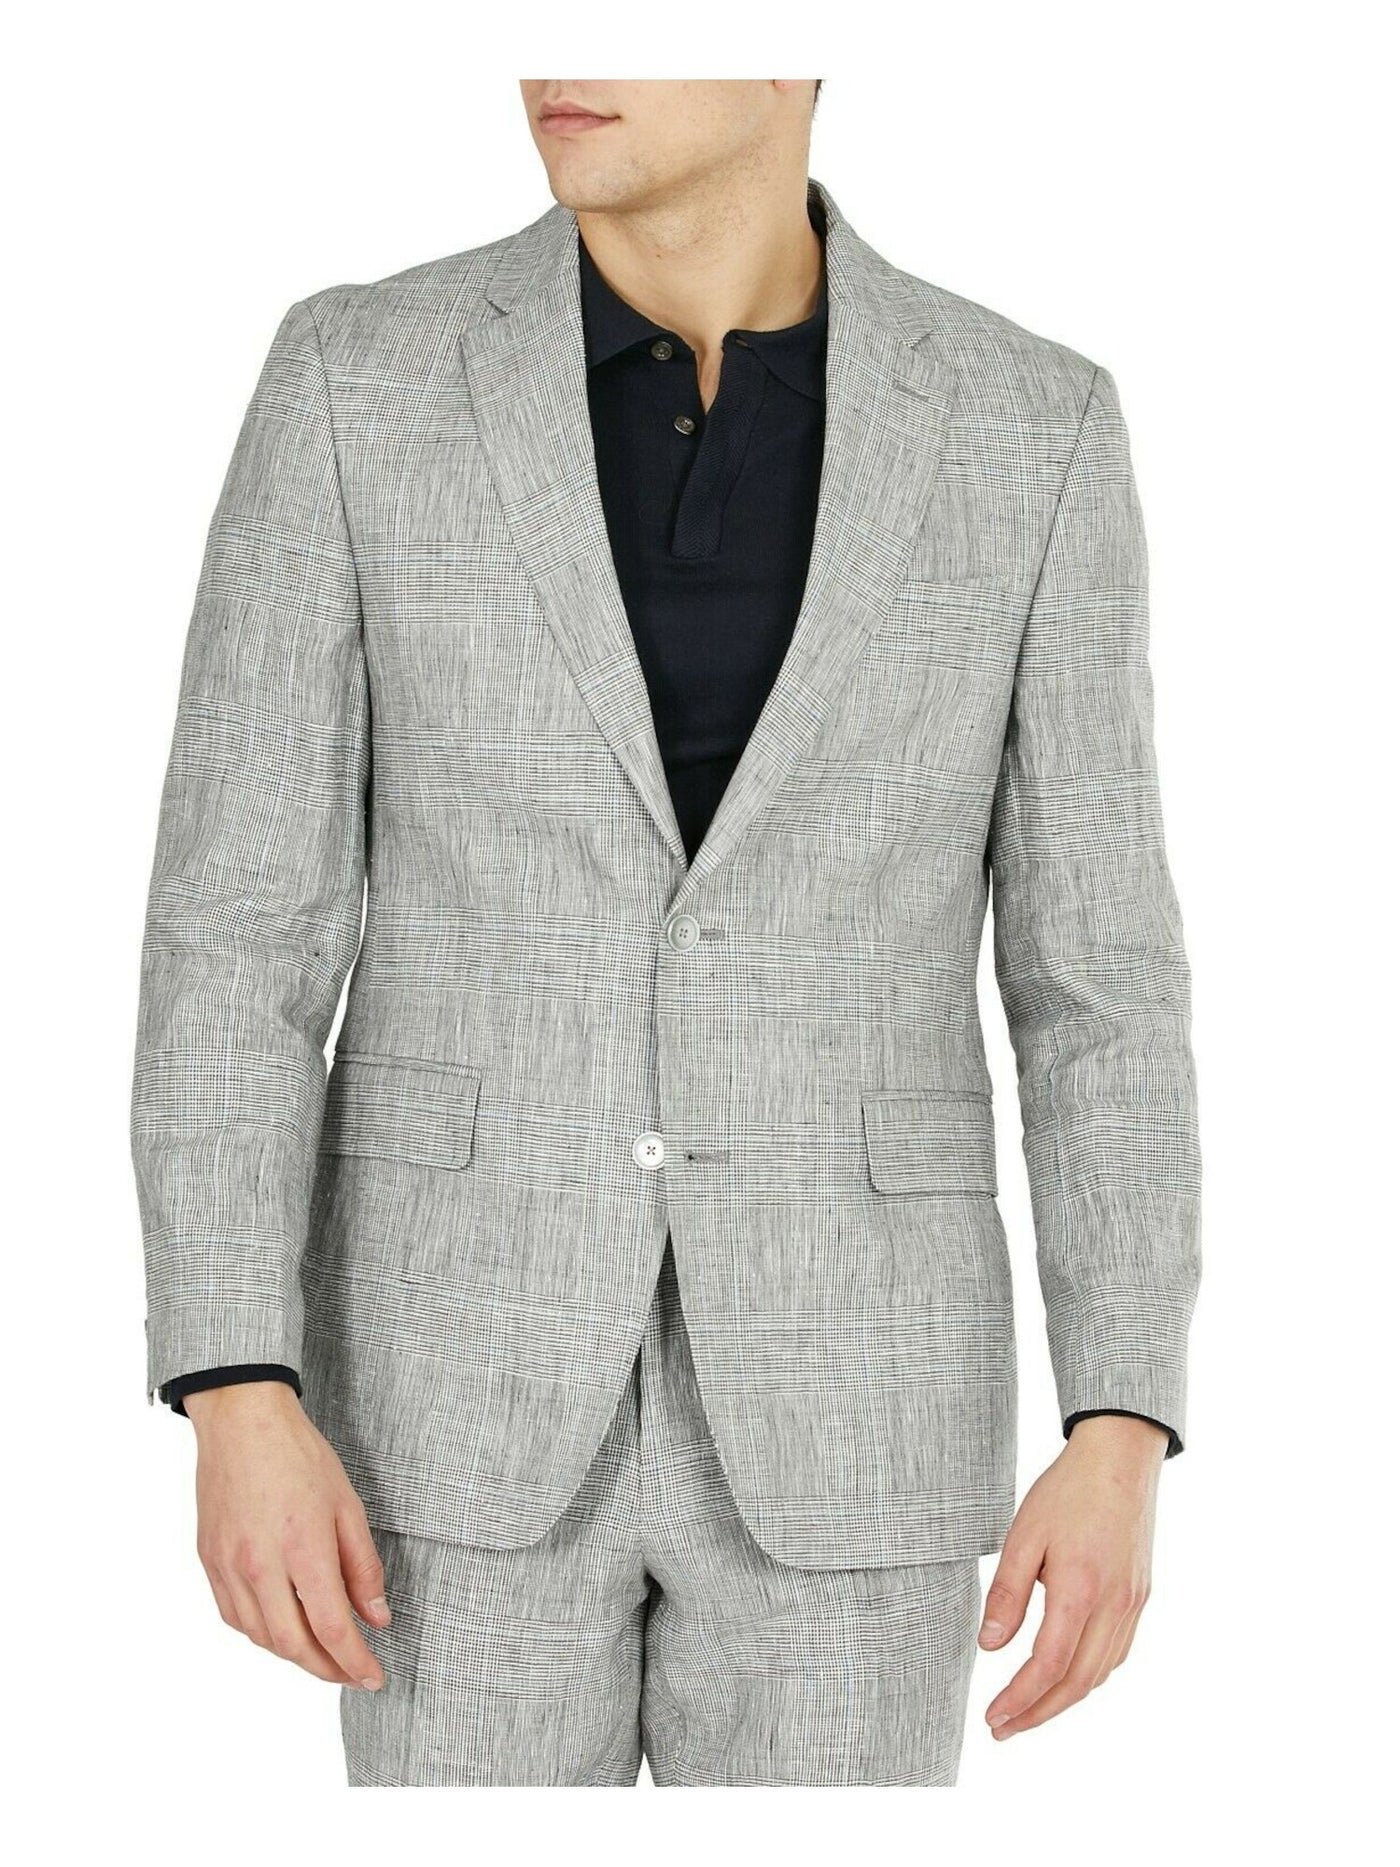 TOMMY HILFIGER Mens Gray Single Breasted, Plaid Classic Fit Suit Separate Blazer Jacket 46R